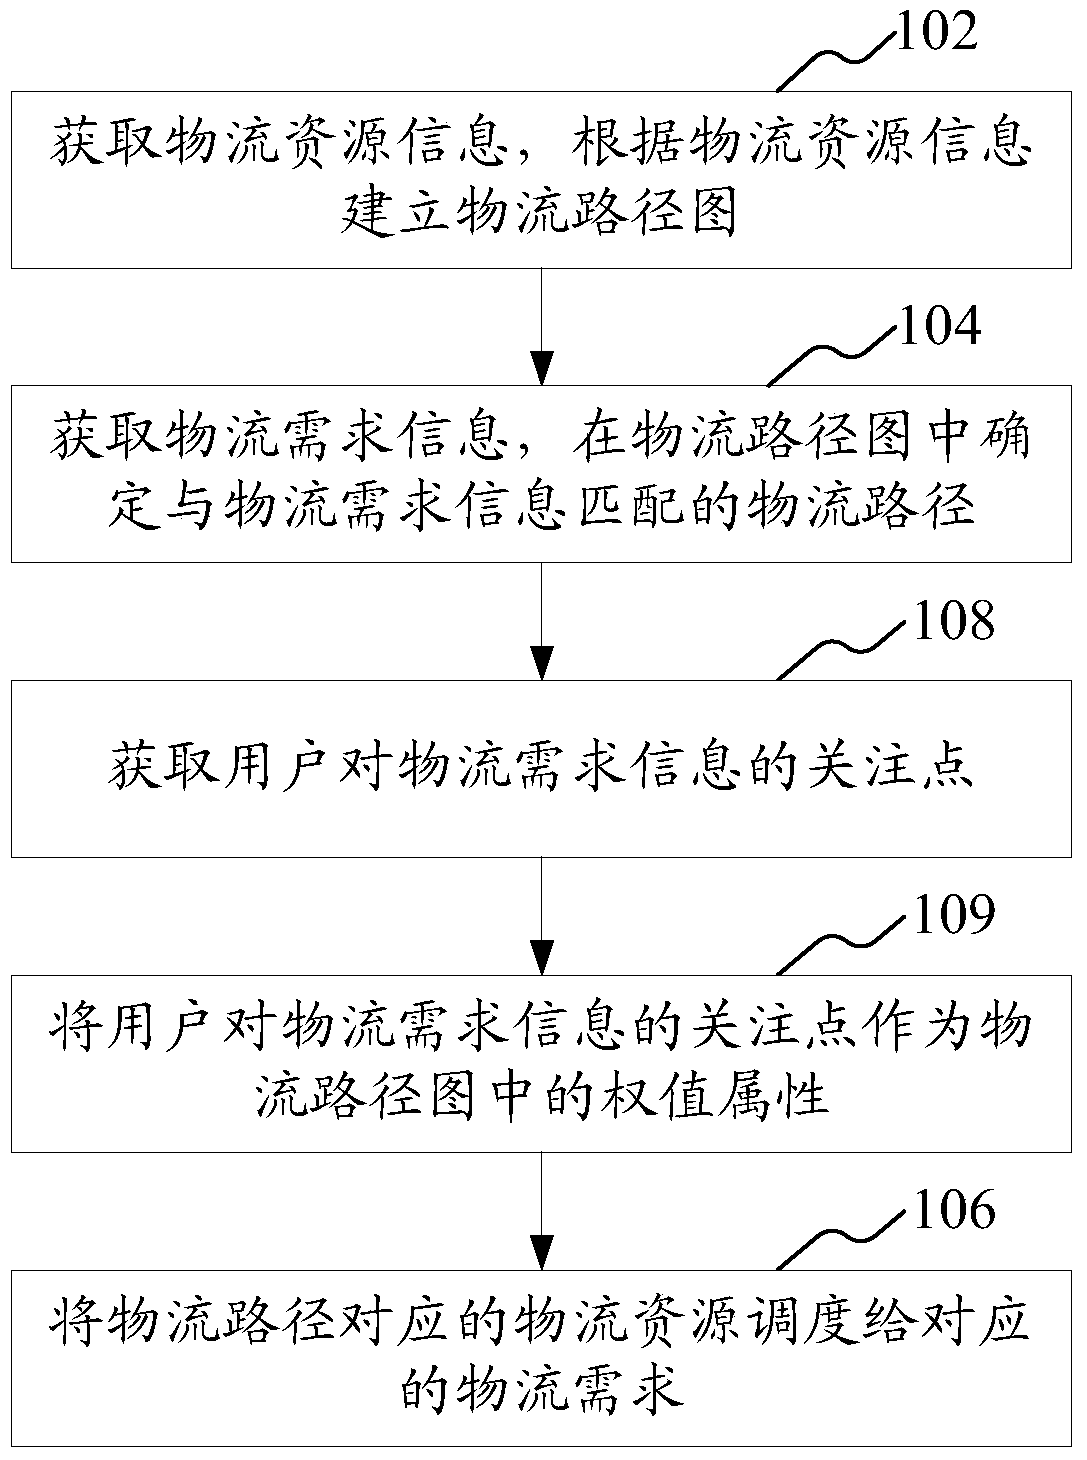 Method and System for Collaborative Logistics Scheduling Based on Graph Theory